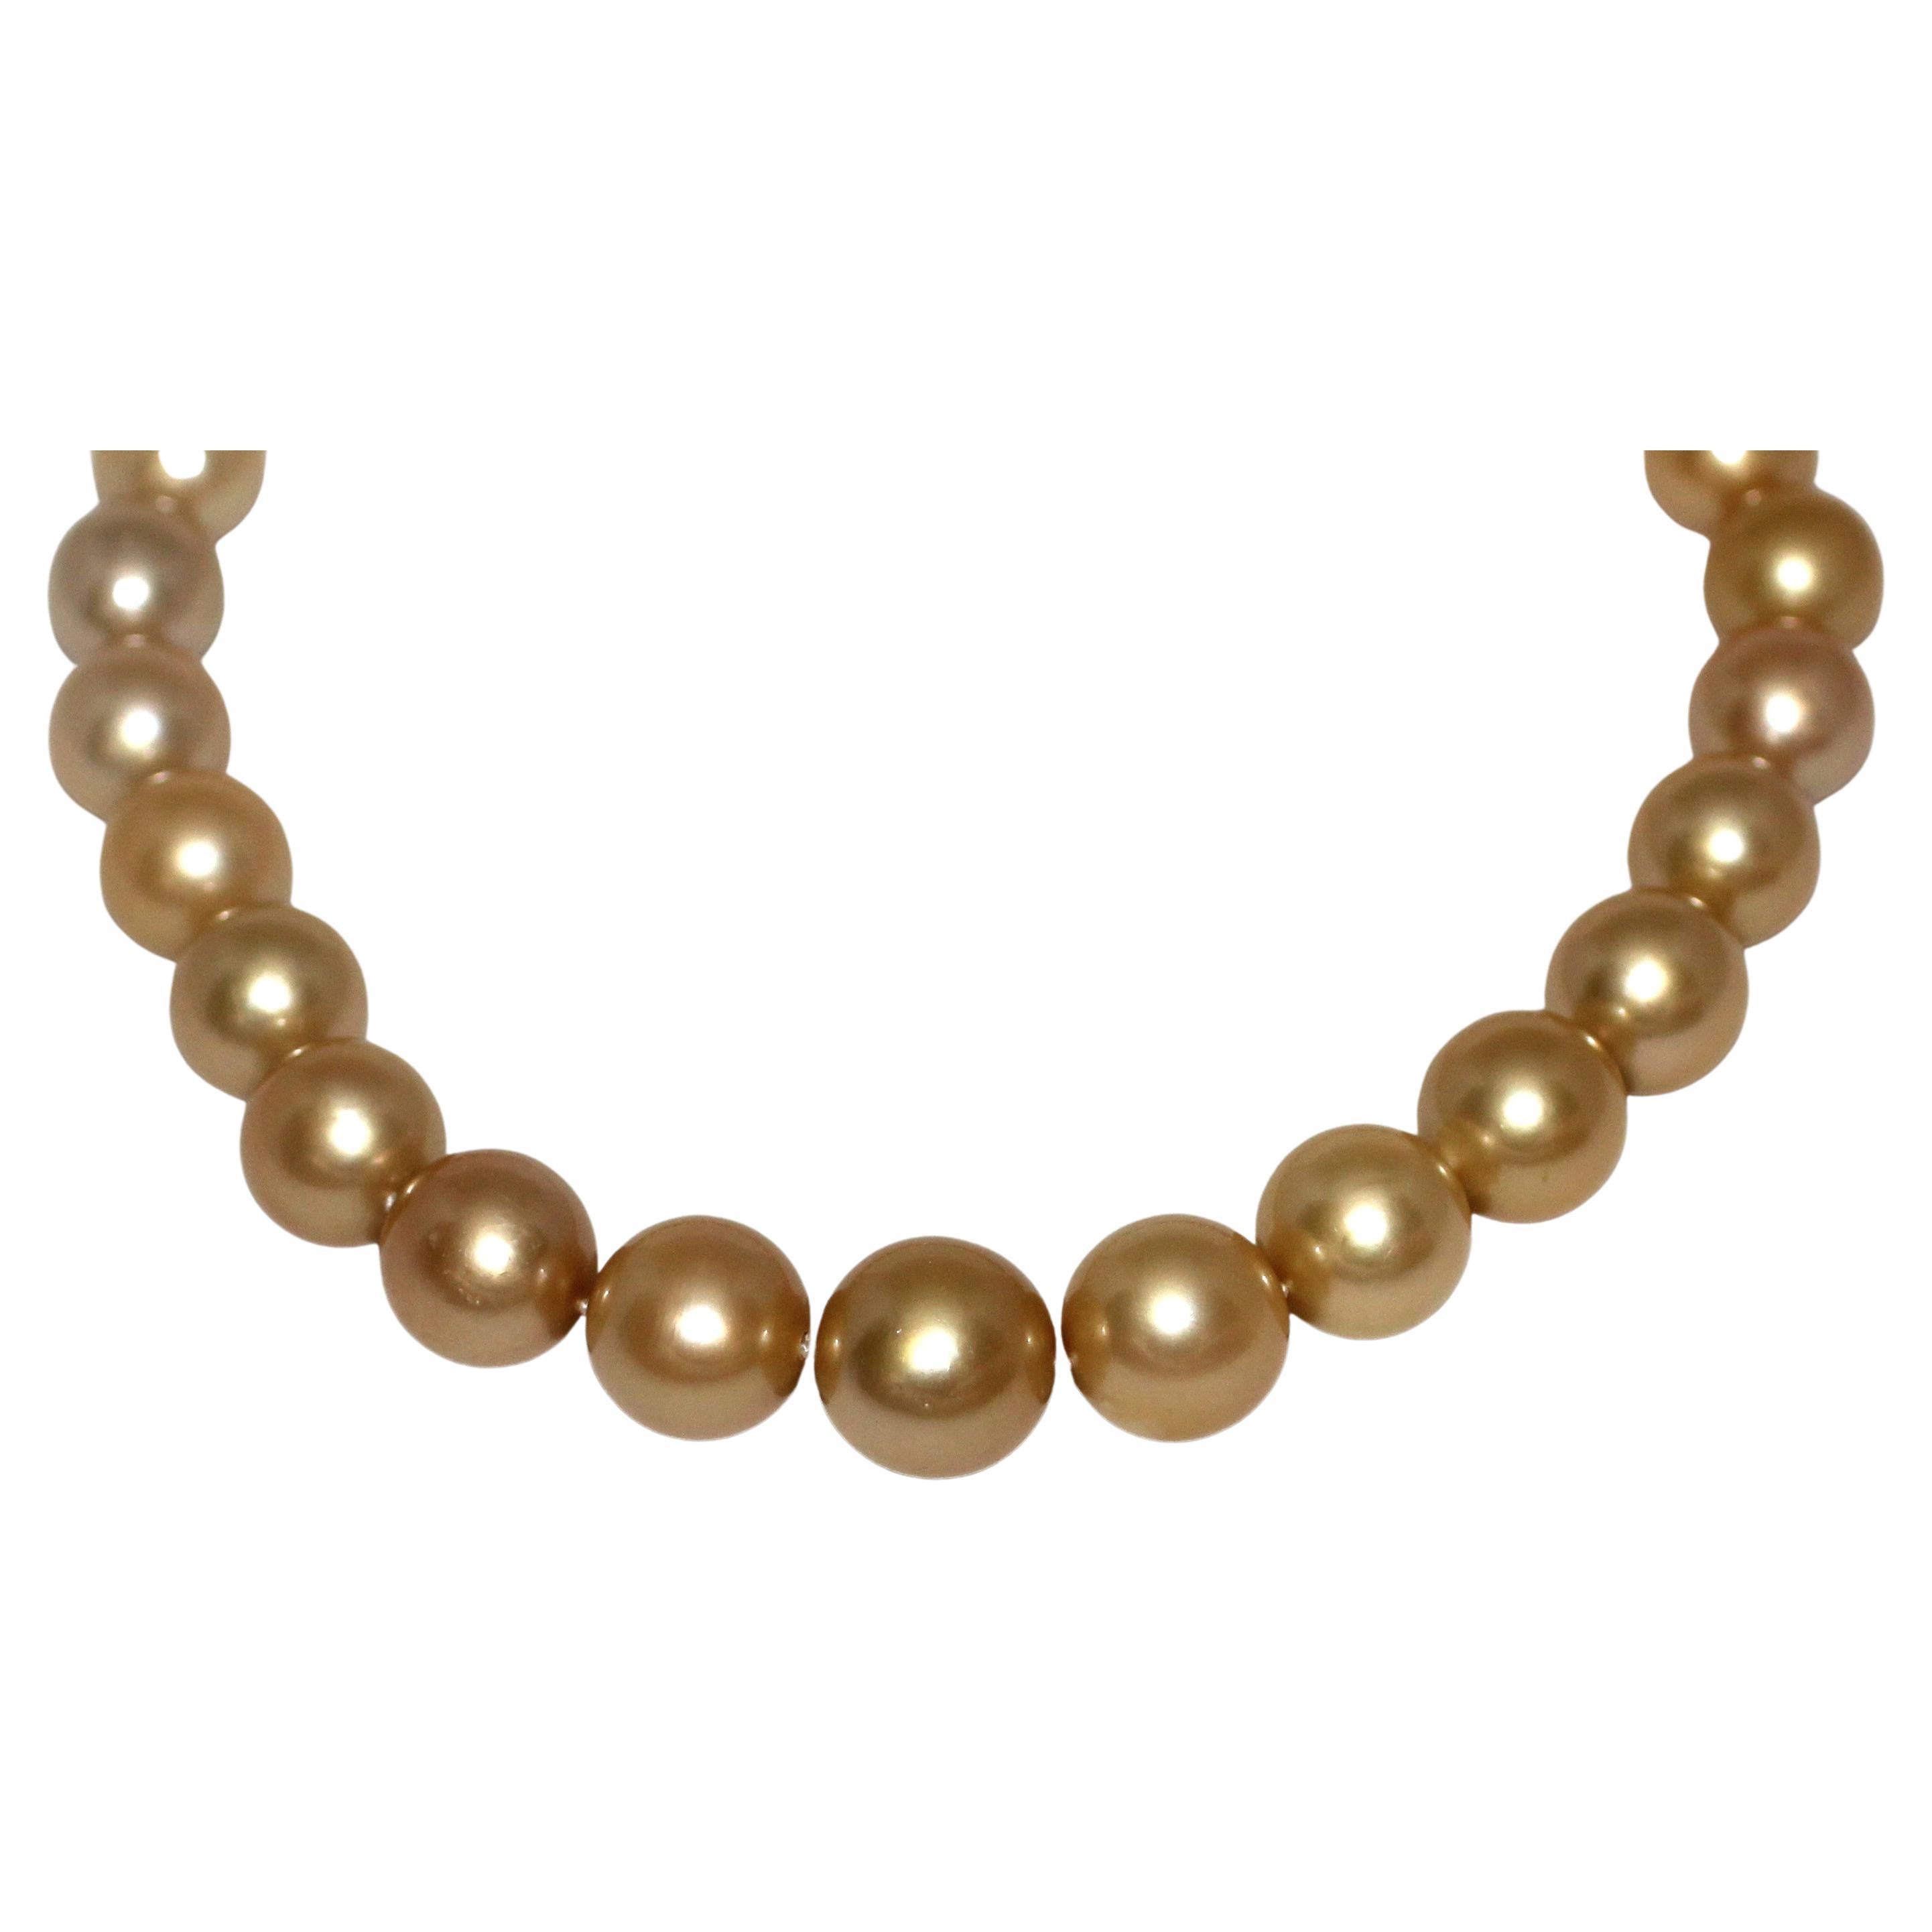 Hakimoto By Jewel Of Ocean 18K Full Ball Clasp South Sea Pearl Necklace 
Retail $200,000.00
18-14mm Natural Color Golden Cultured South Sea Pearls
Total Item Weight (g): 144.2
Measurements: Chain Length 17.5